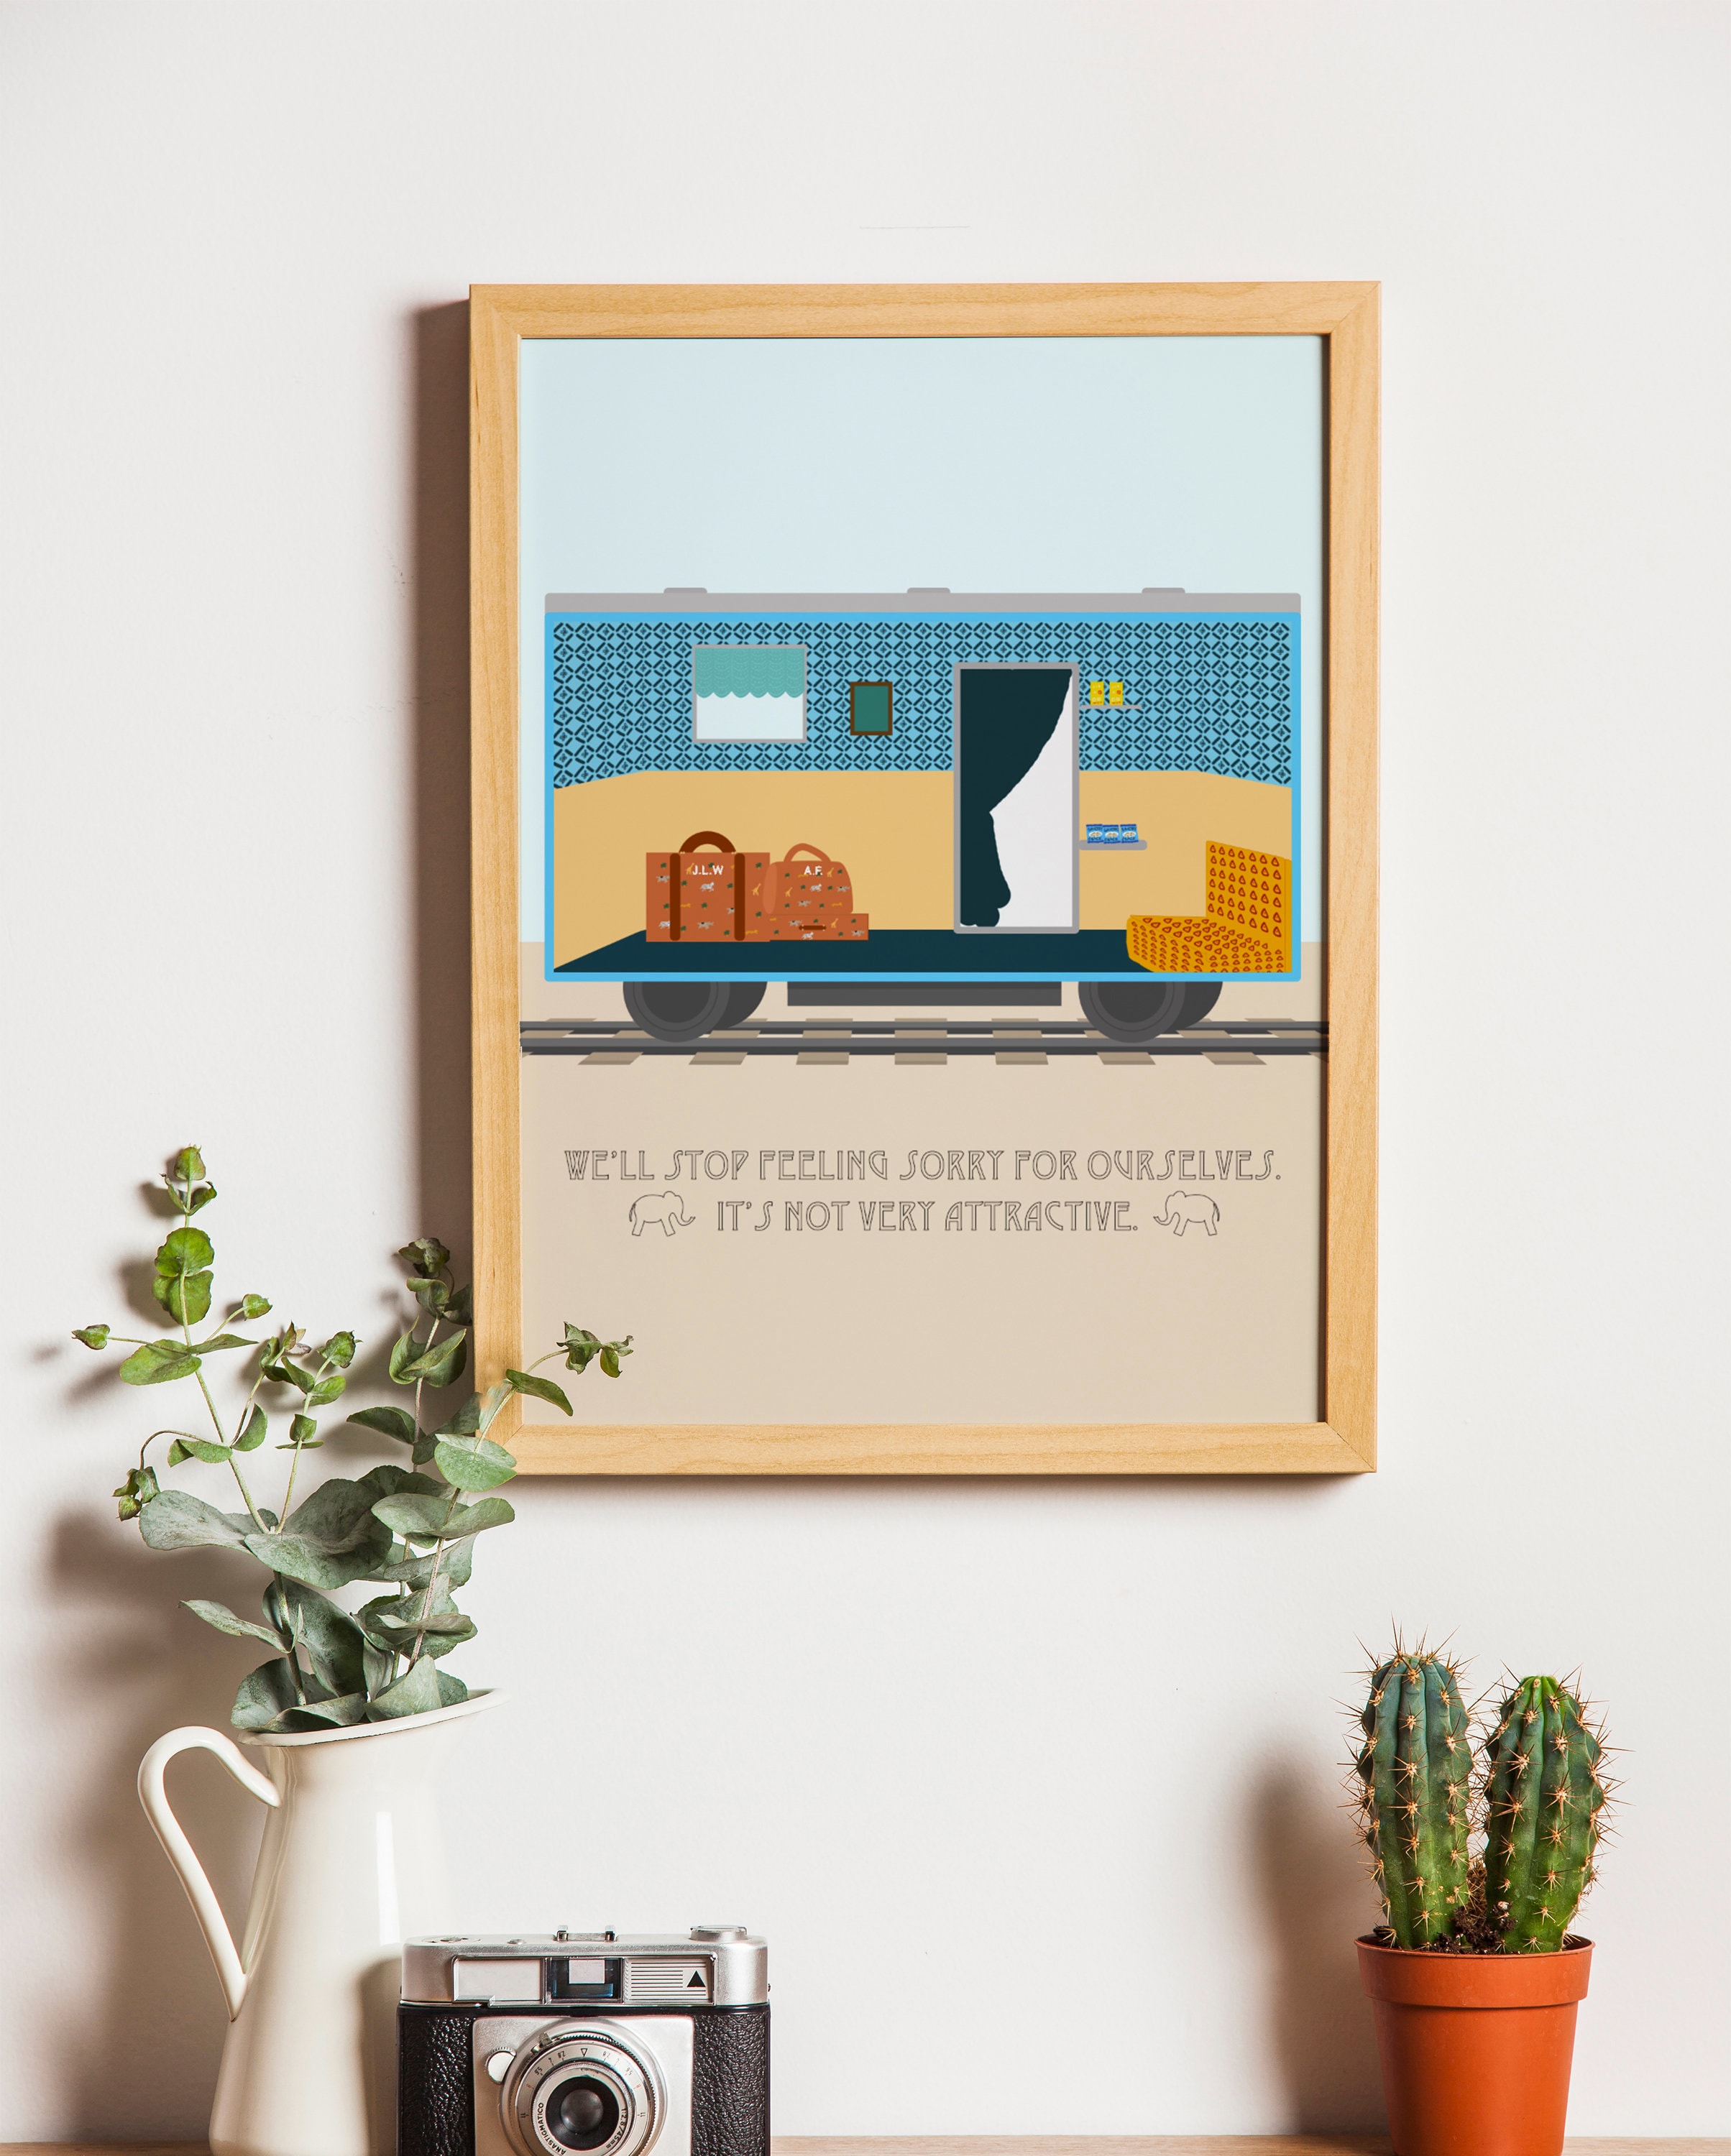 Wes Anderson Darjeeling Limited Poster for Sale by sleepymountain